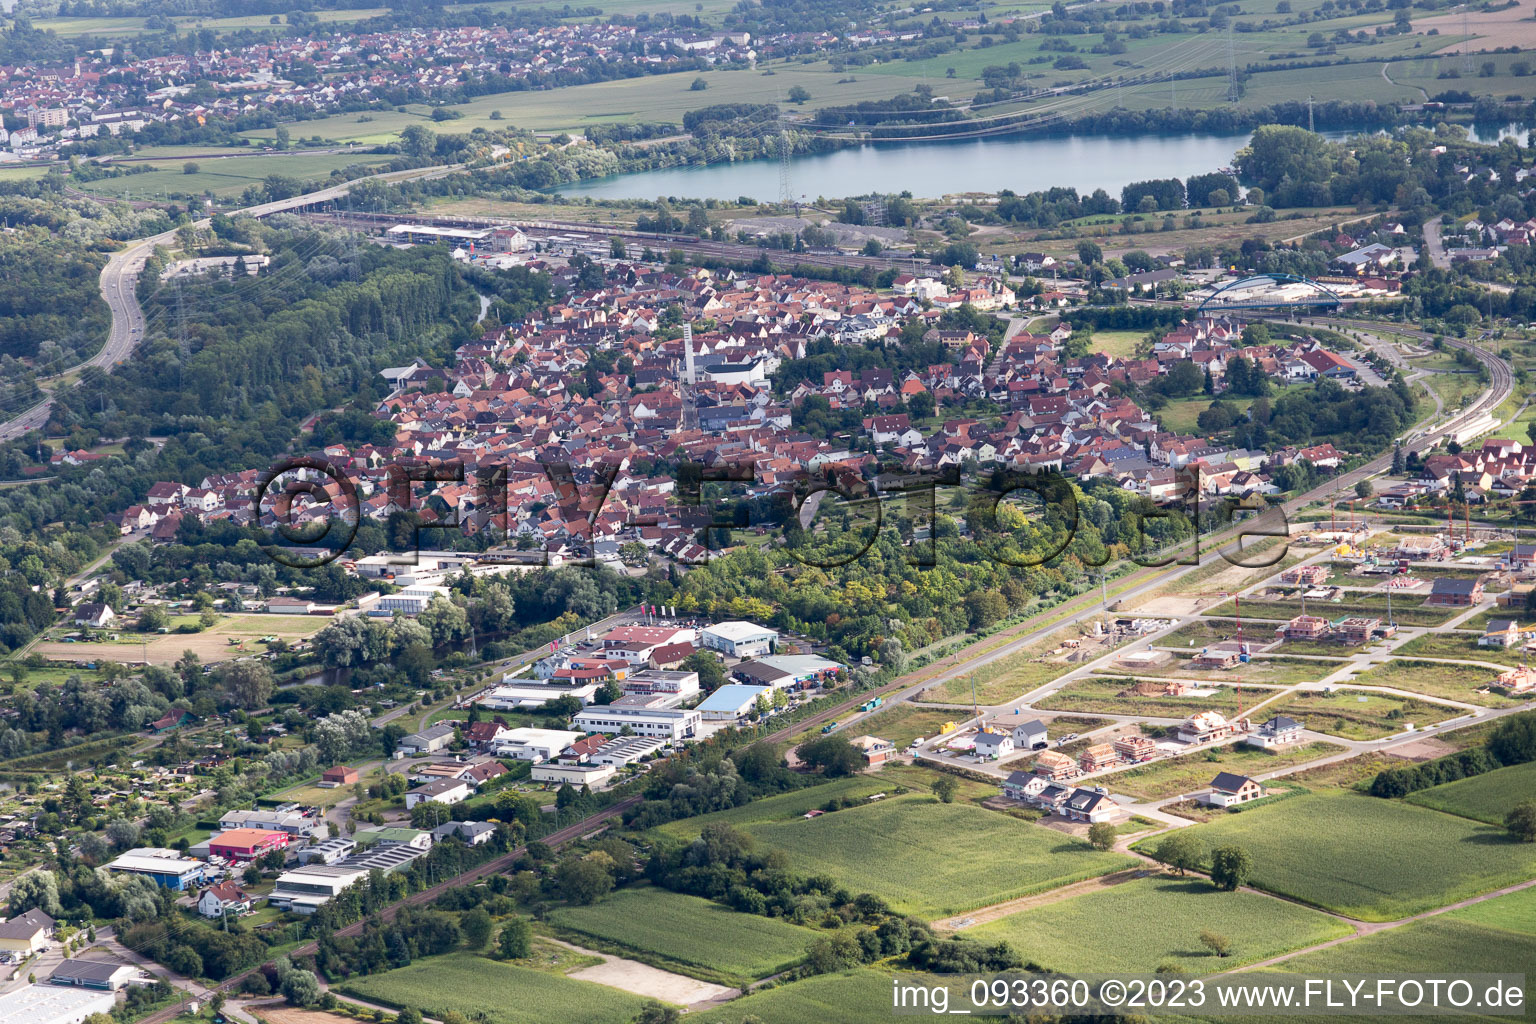 Aerial photograpy of New development area in Wörth am Rhein in the state Rhineland-Palatinate, Germany